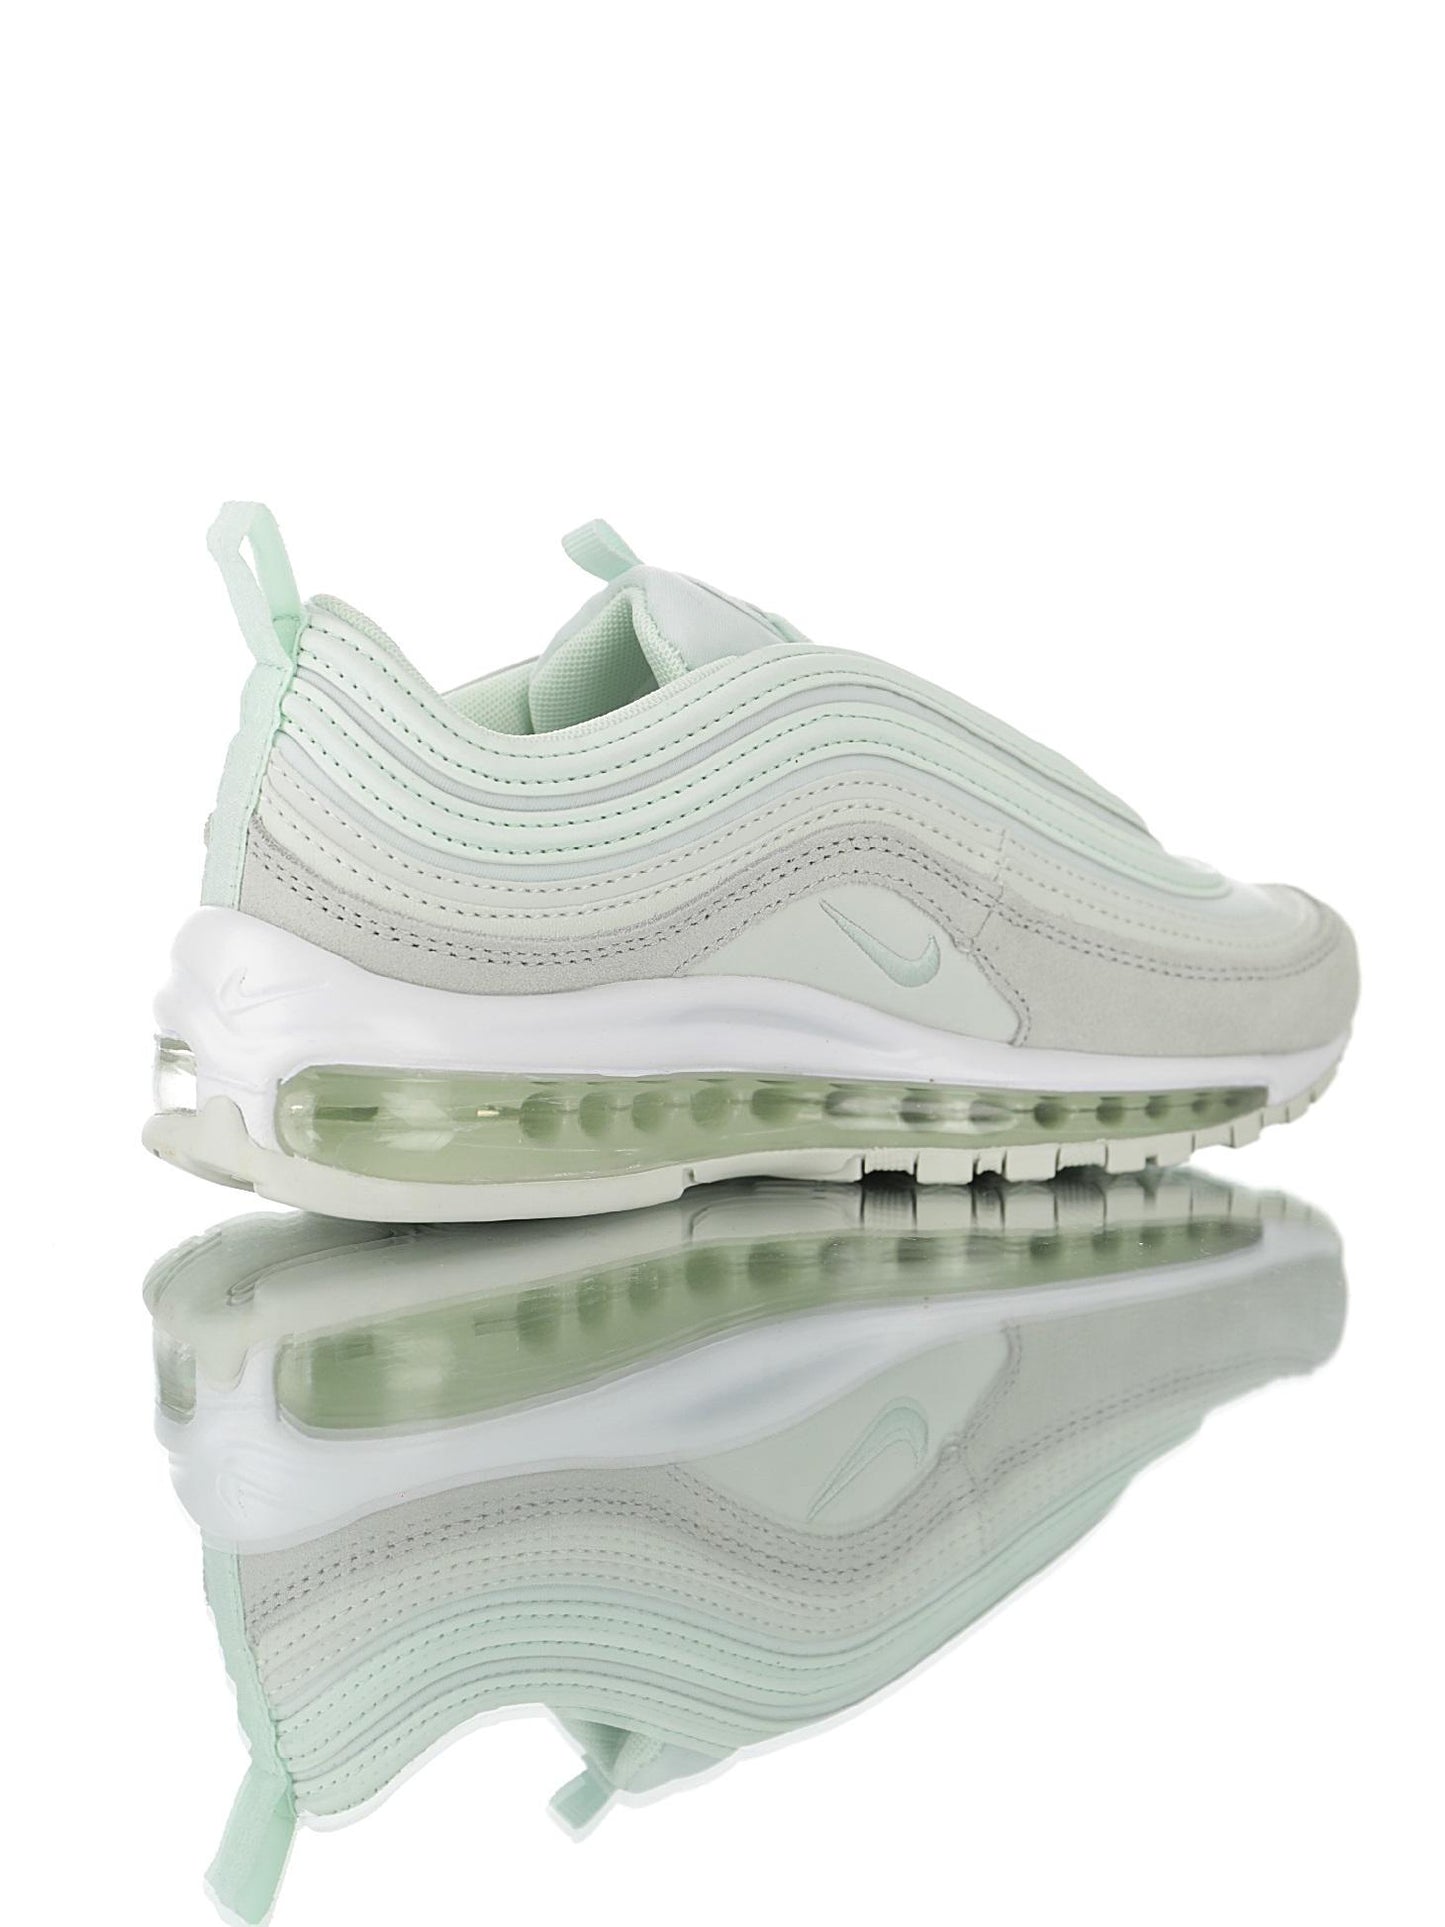 Air Max 97 - whatever on 